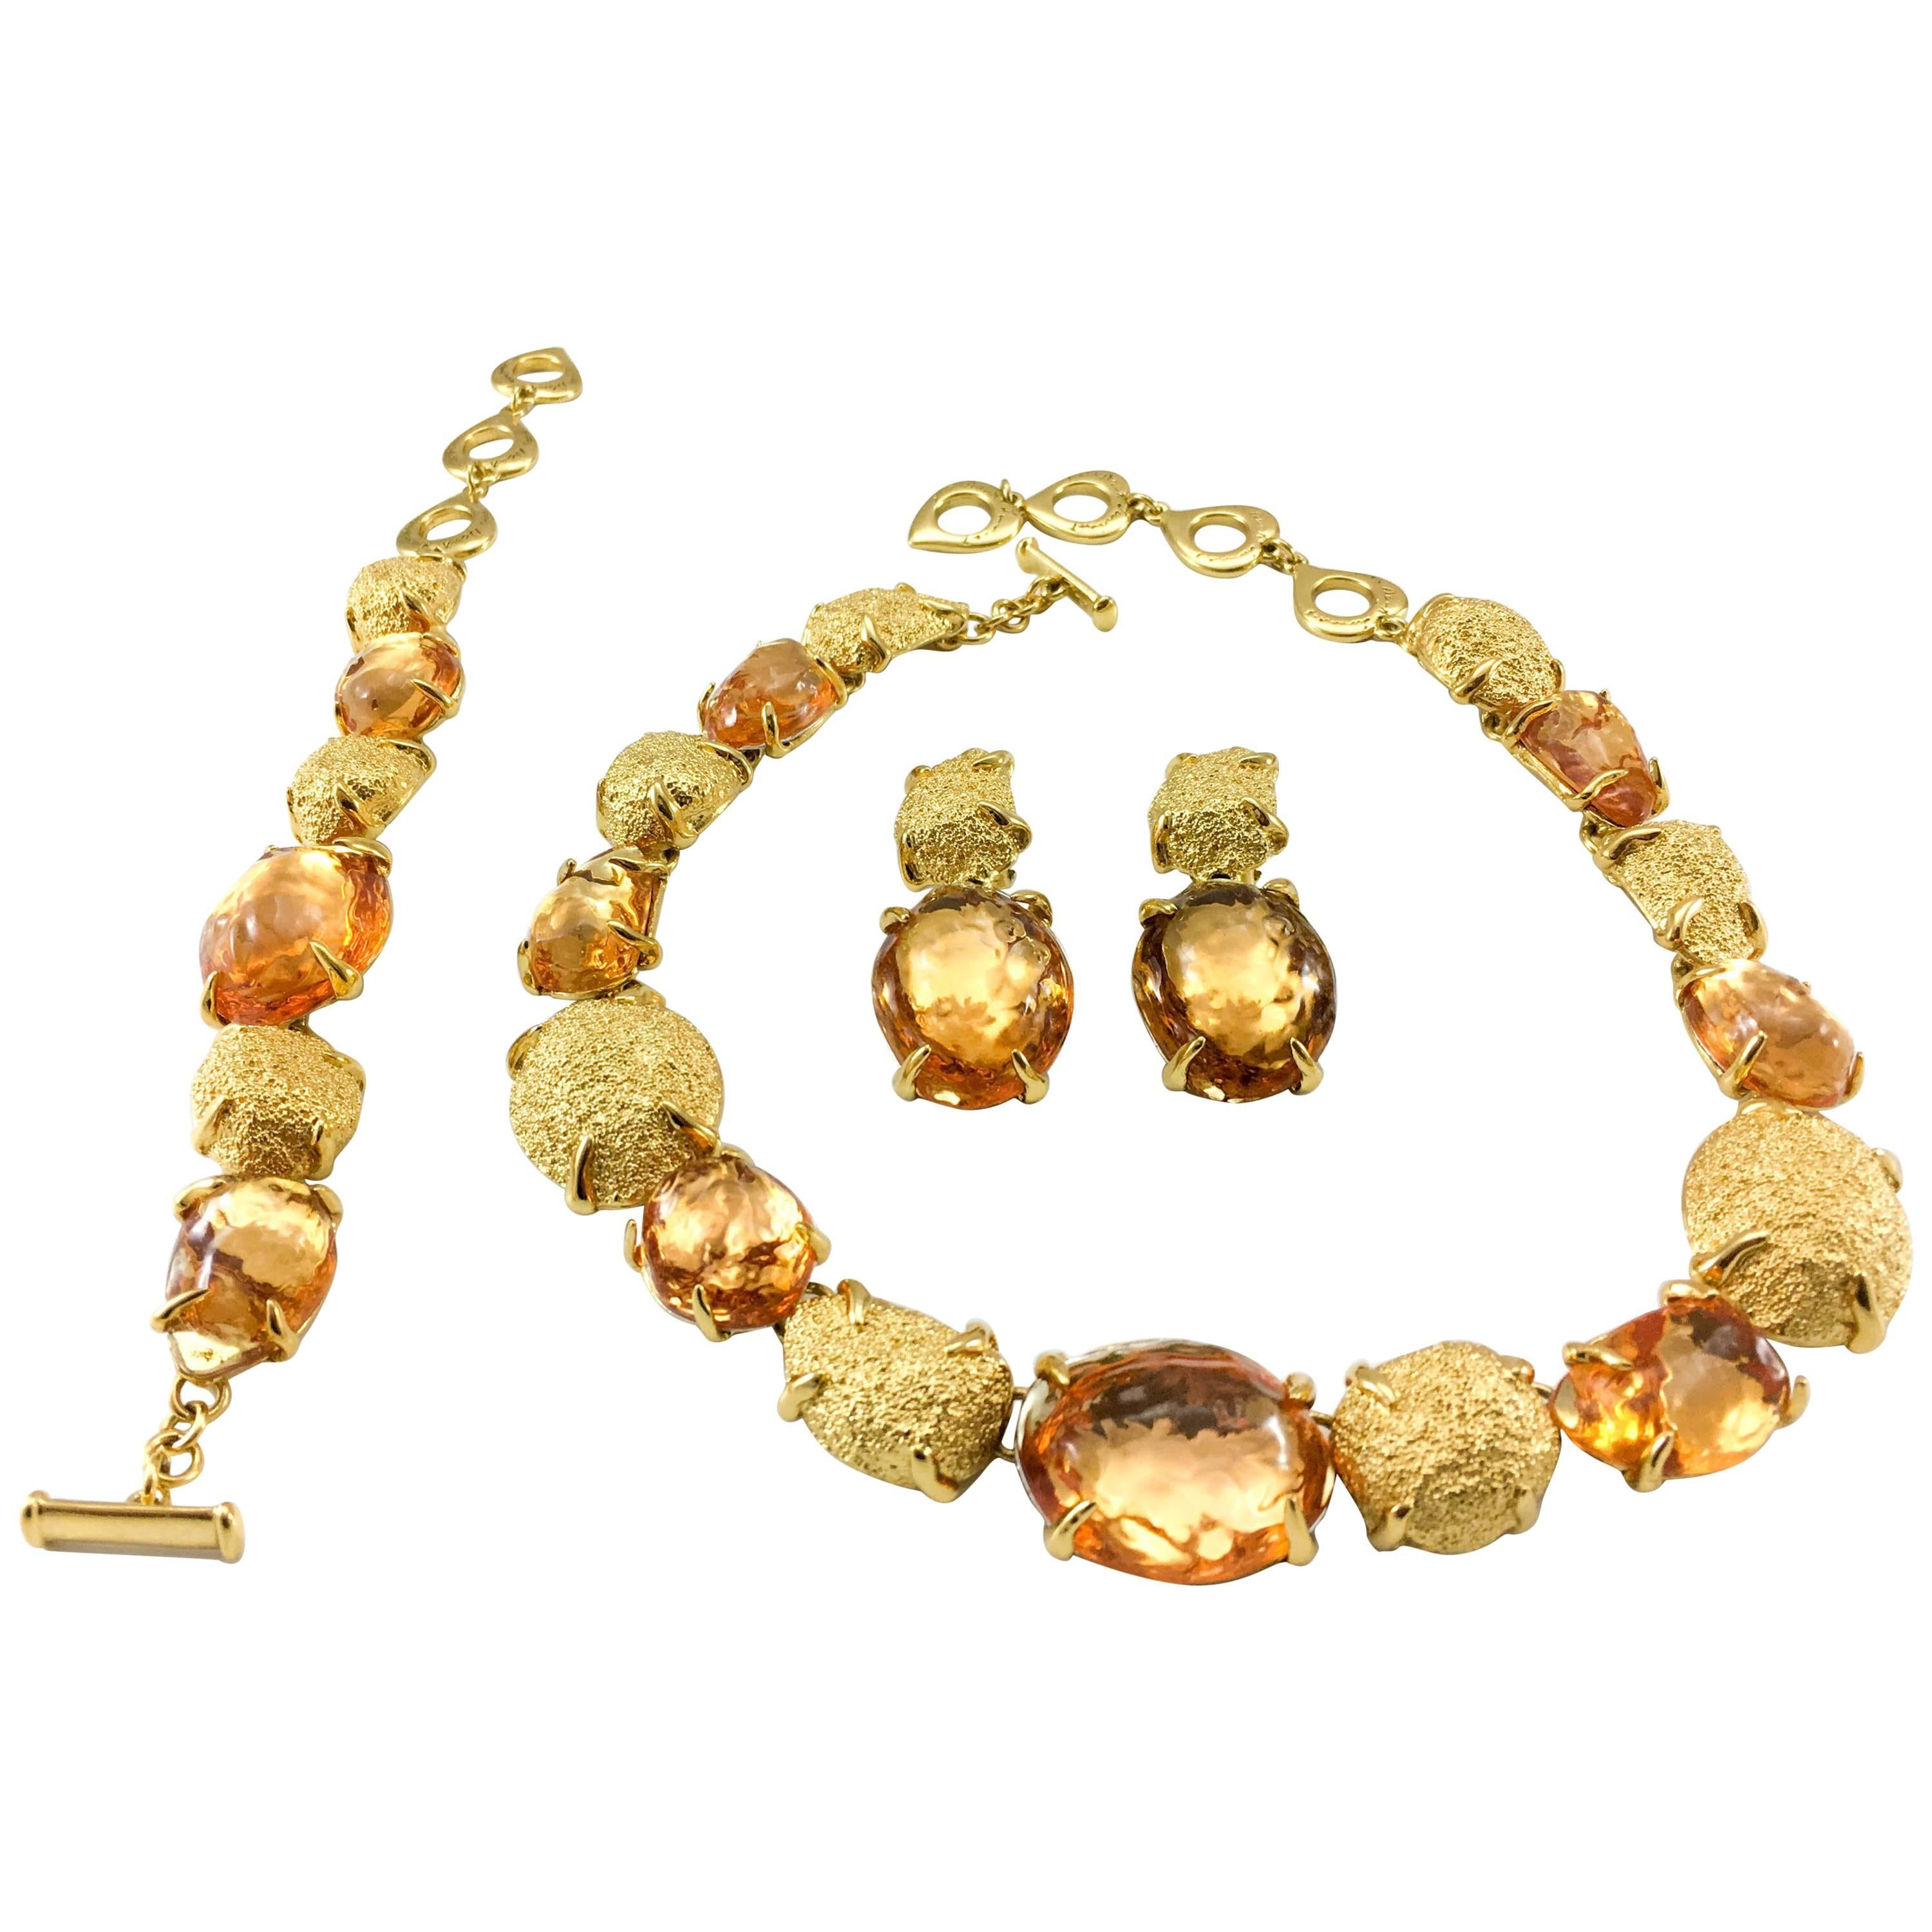 1980s Yves Saint Laurent by Goossens Faux Topaz and Gold-Plated Nugget Set